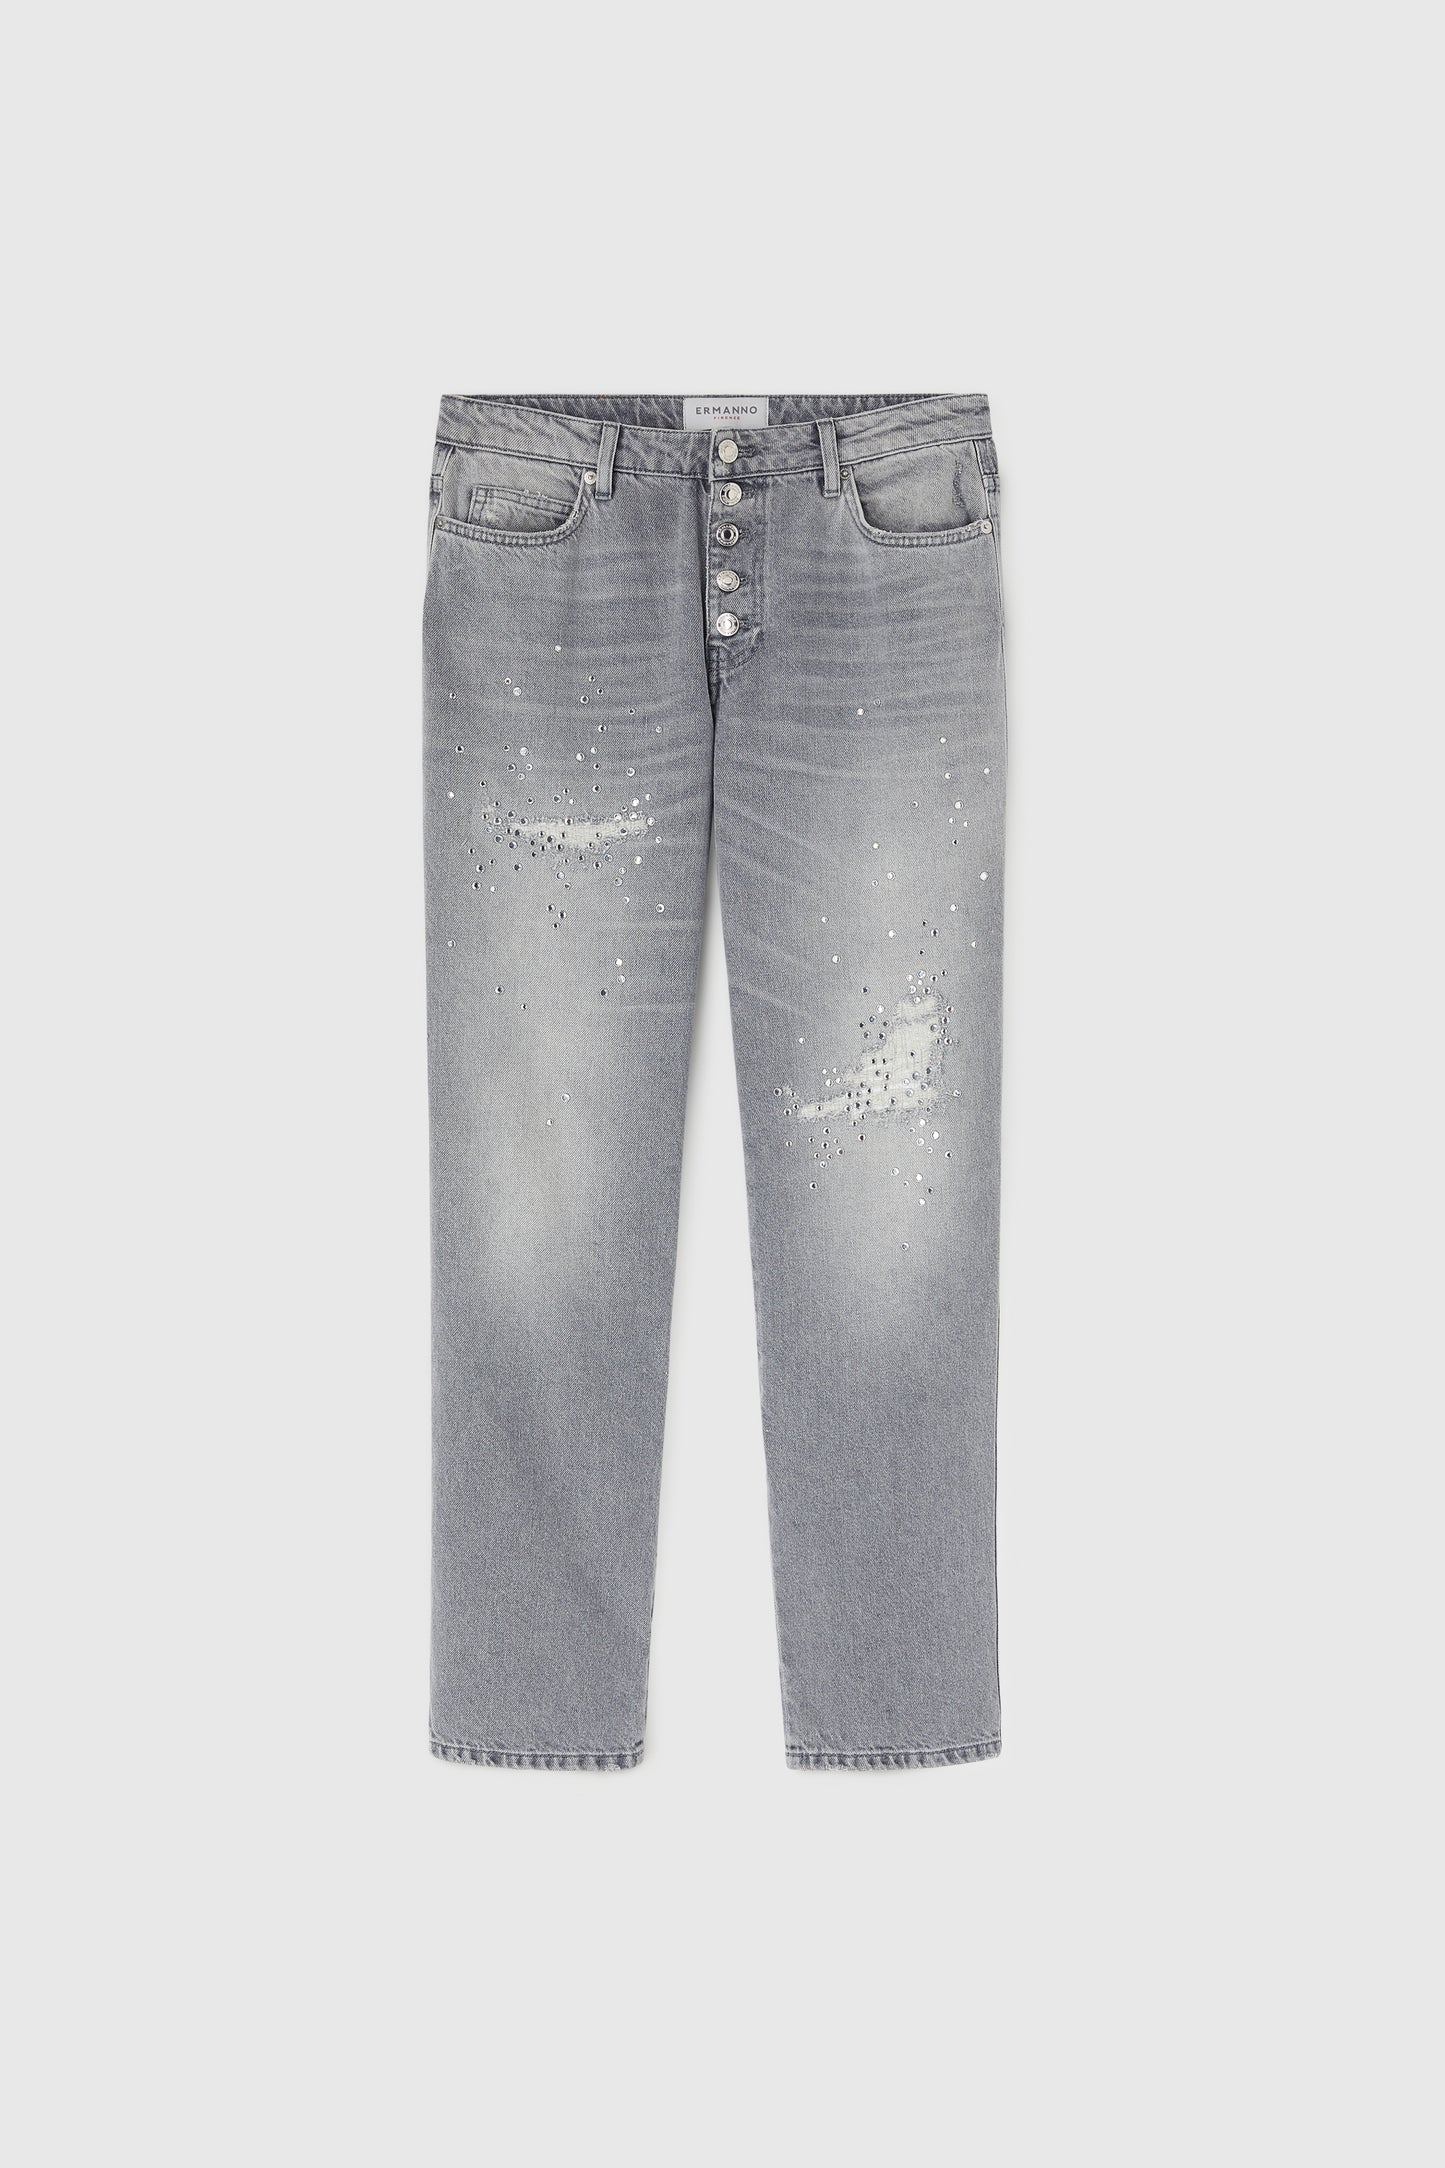 Crystal-adorned cotton jeans